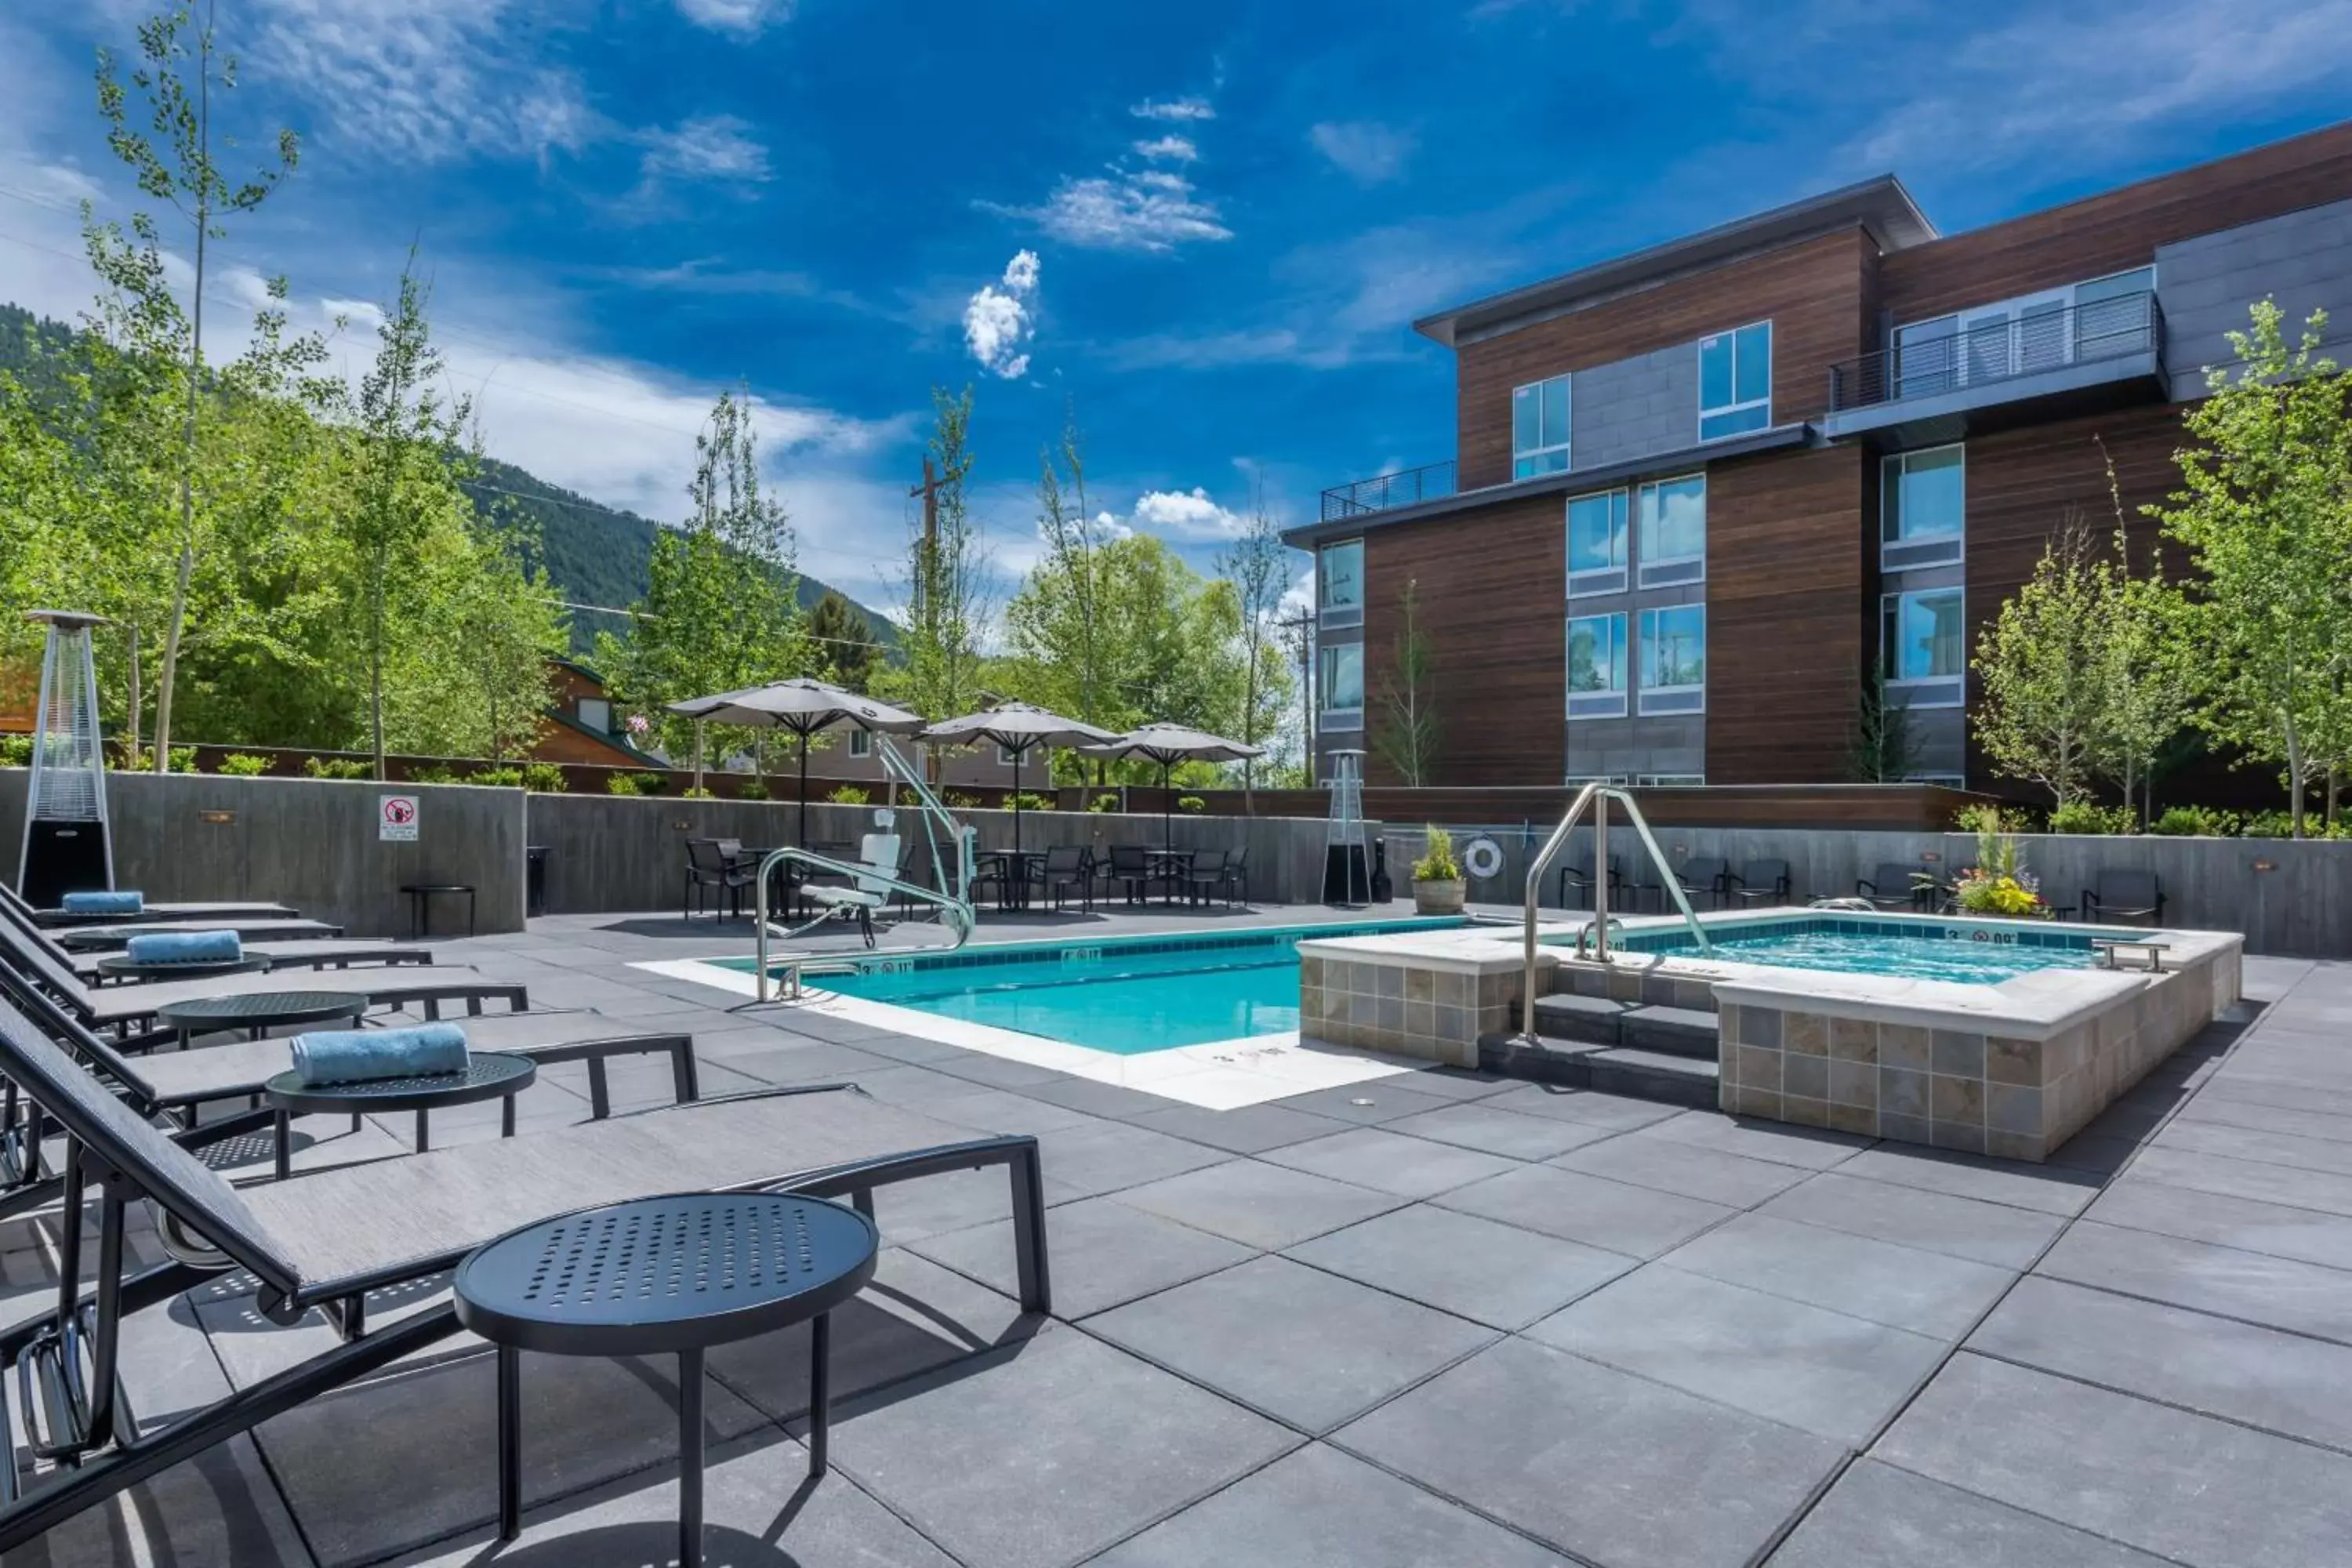 Swimming Pool in SpringHill Suites by Marriott Jackson Hole